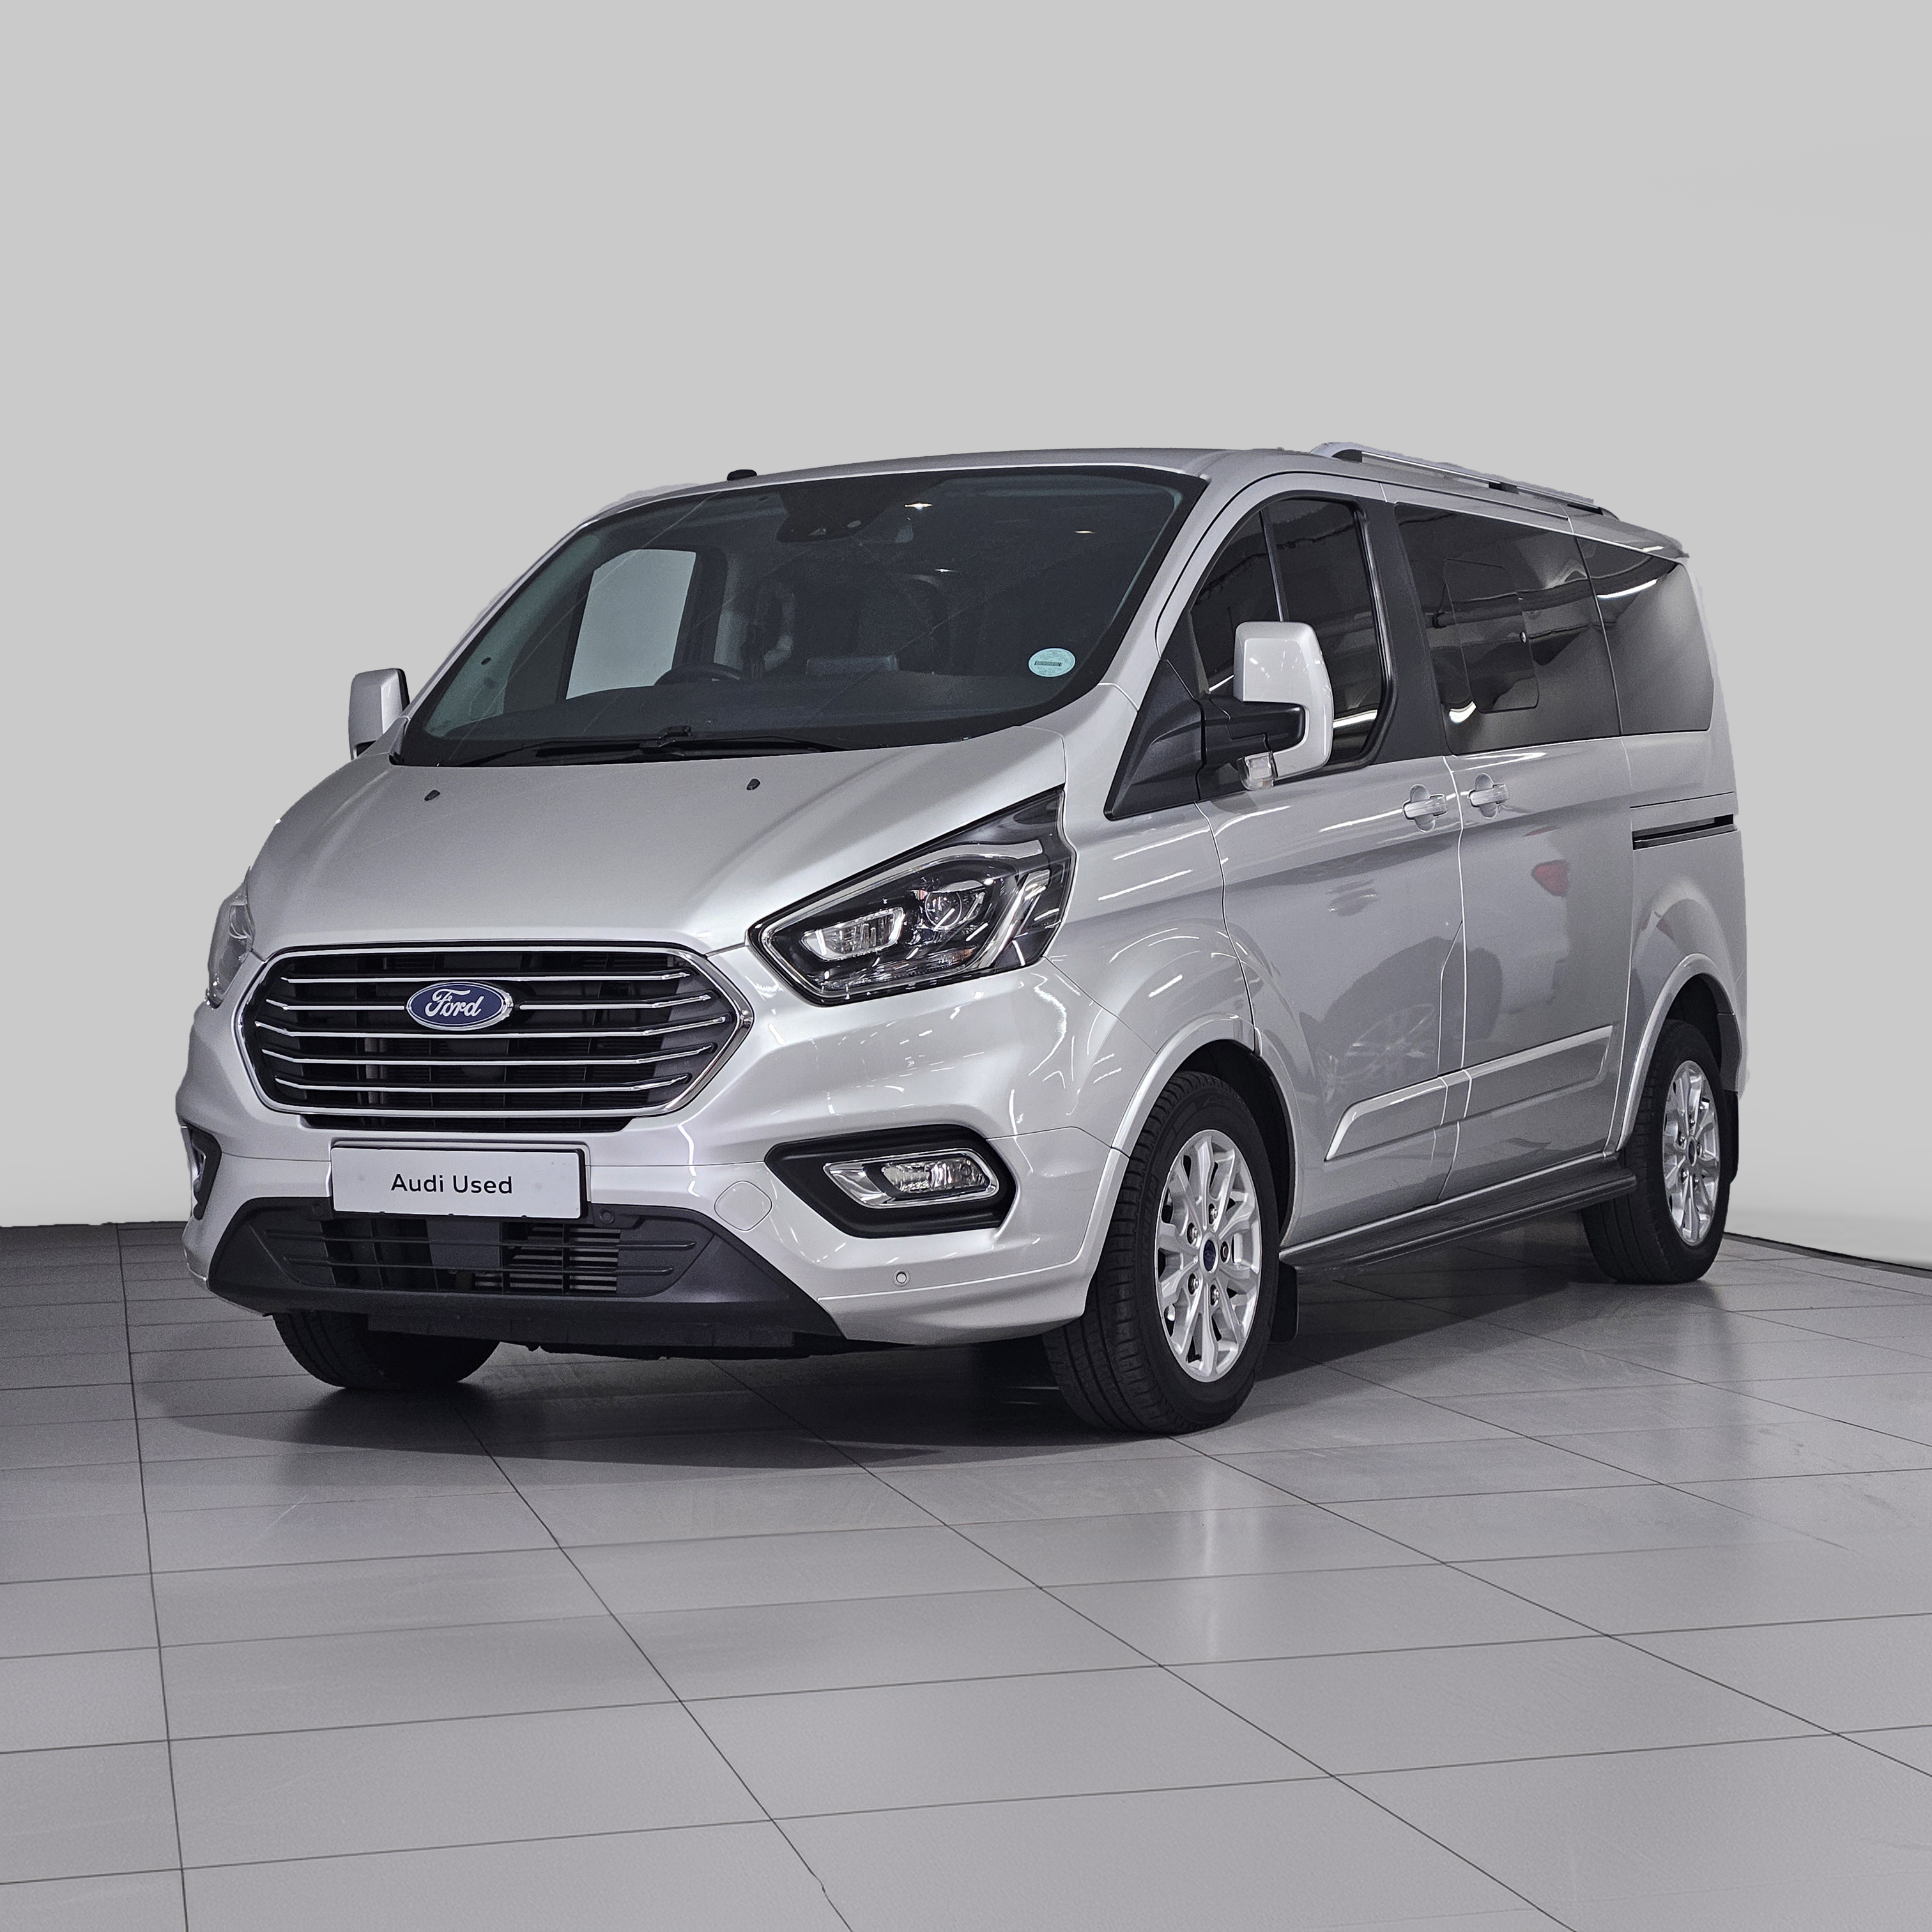 2022 Ford Tourneo Custom  for sale - 314076/1